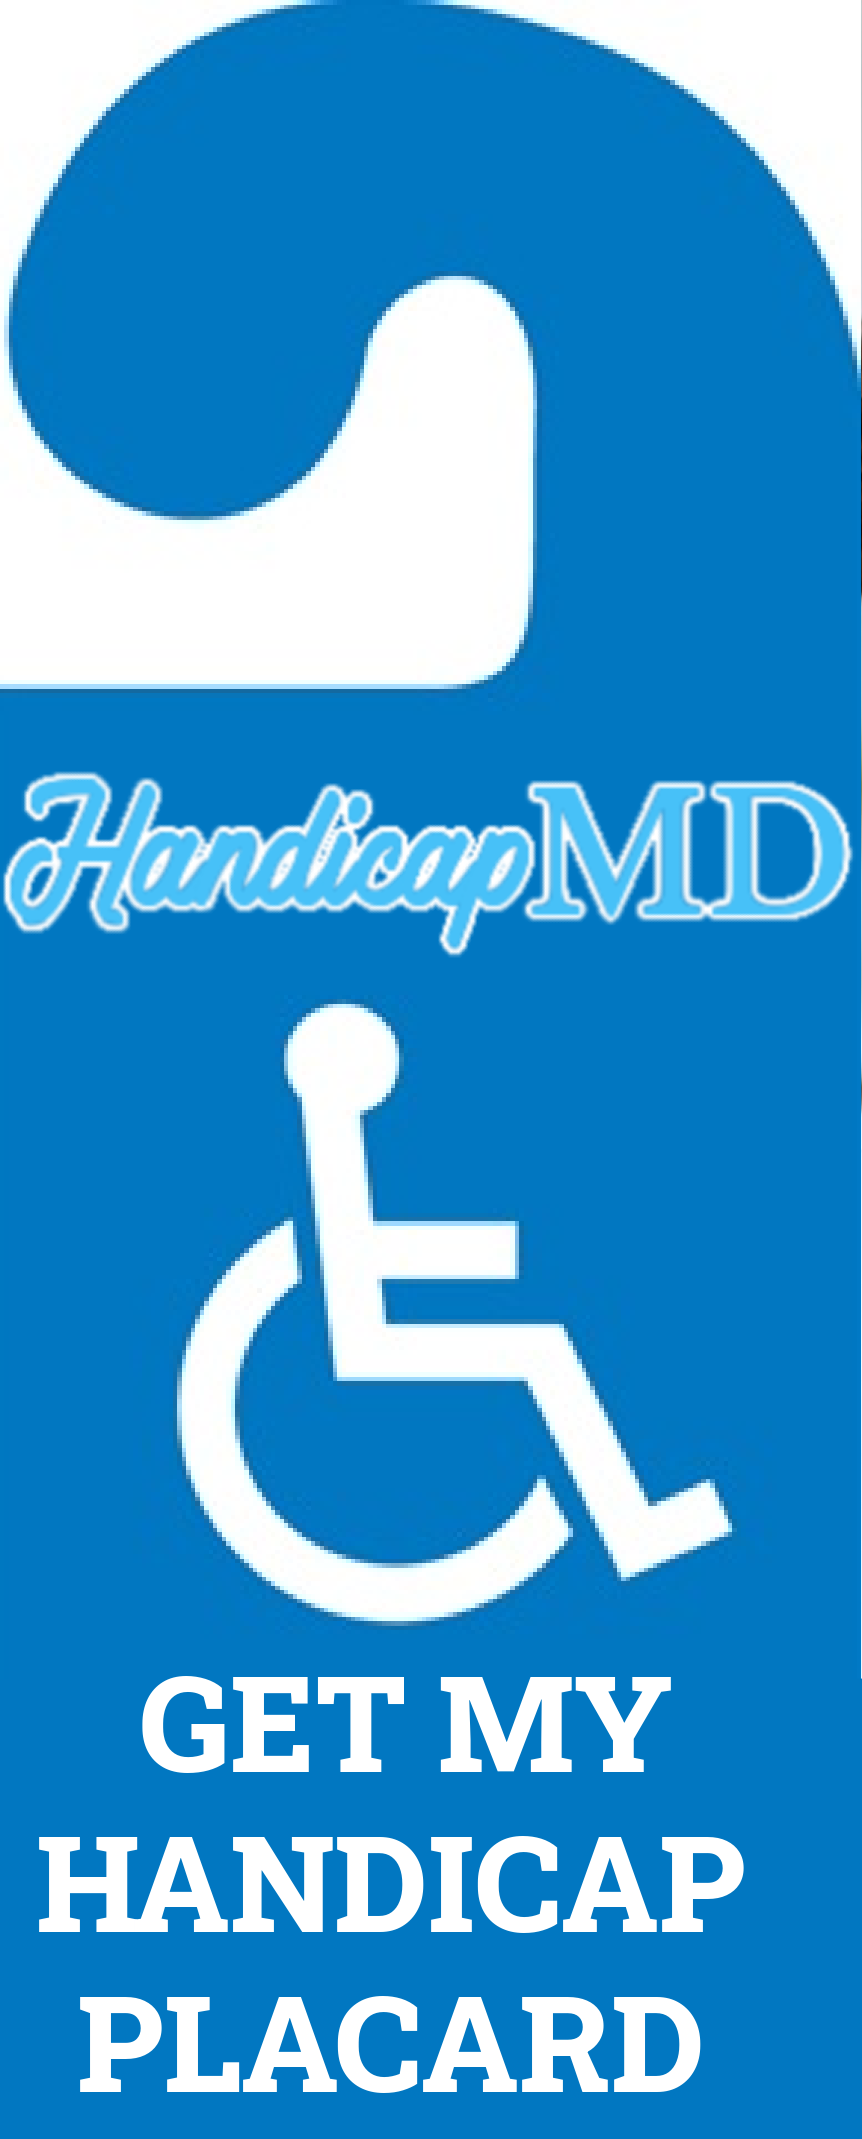 How to Replace a Lost or Stolen Handicap Placard in Washington